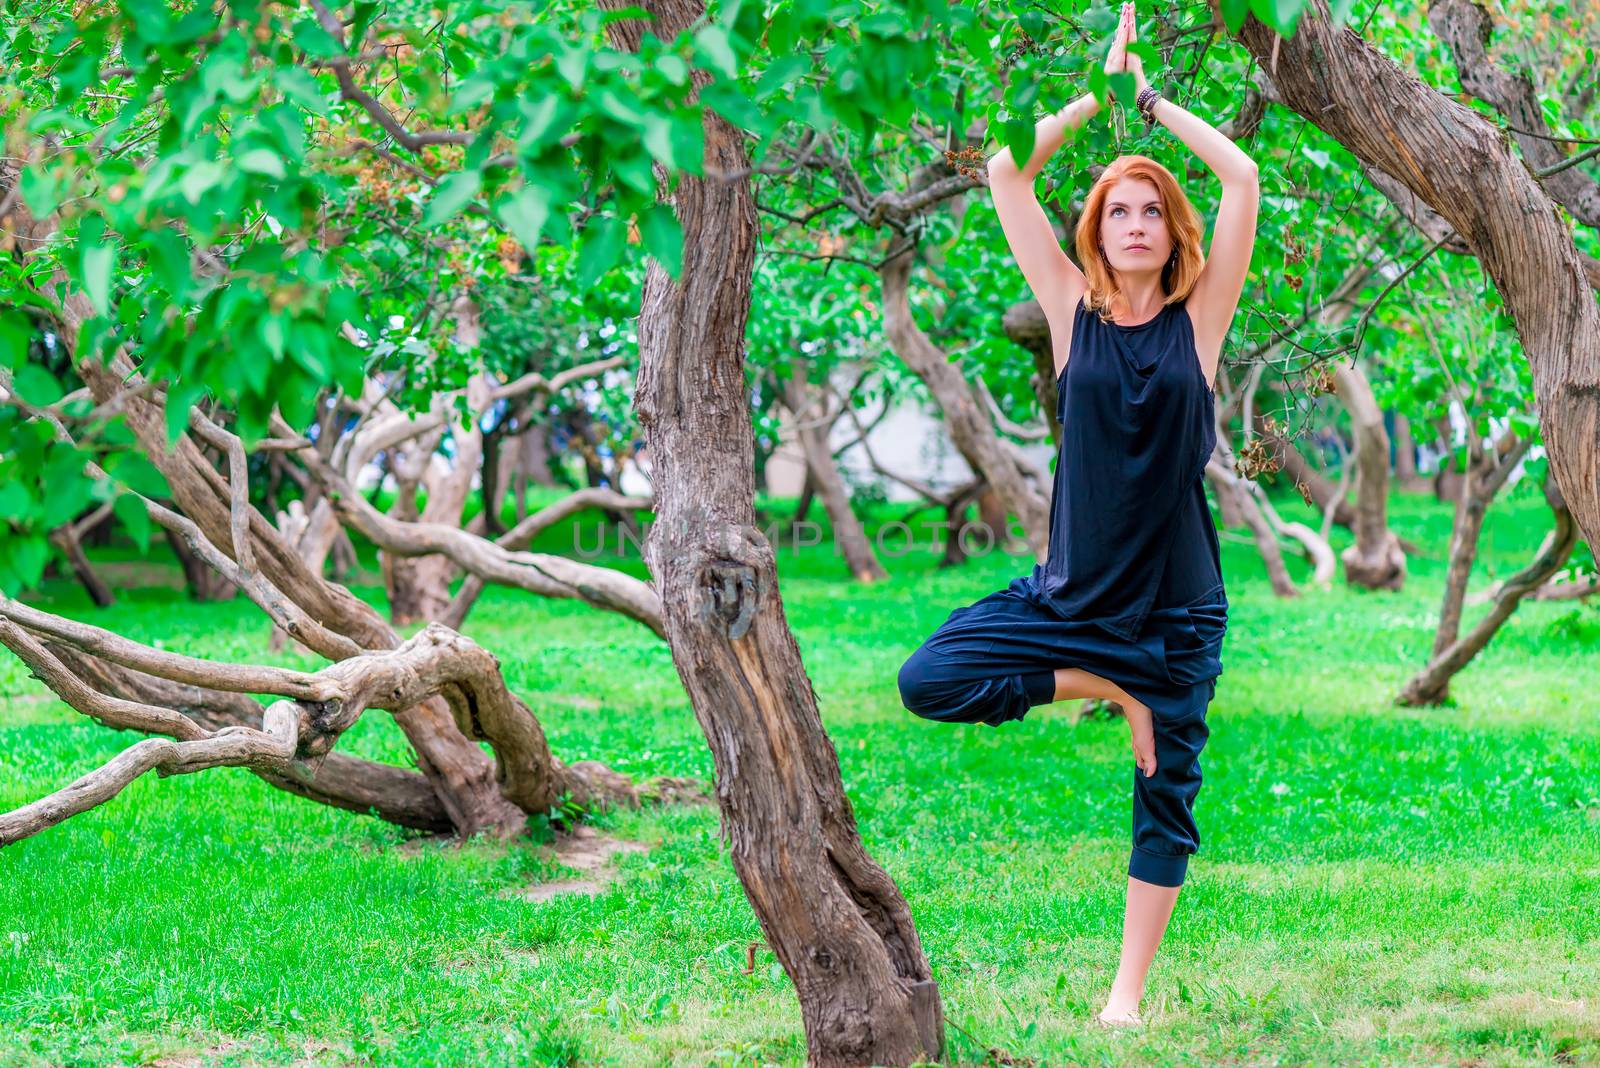 barefoot woman practices yoga in the park among the trees by kosmsos111